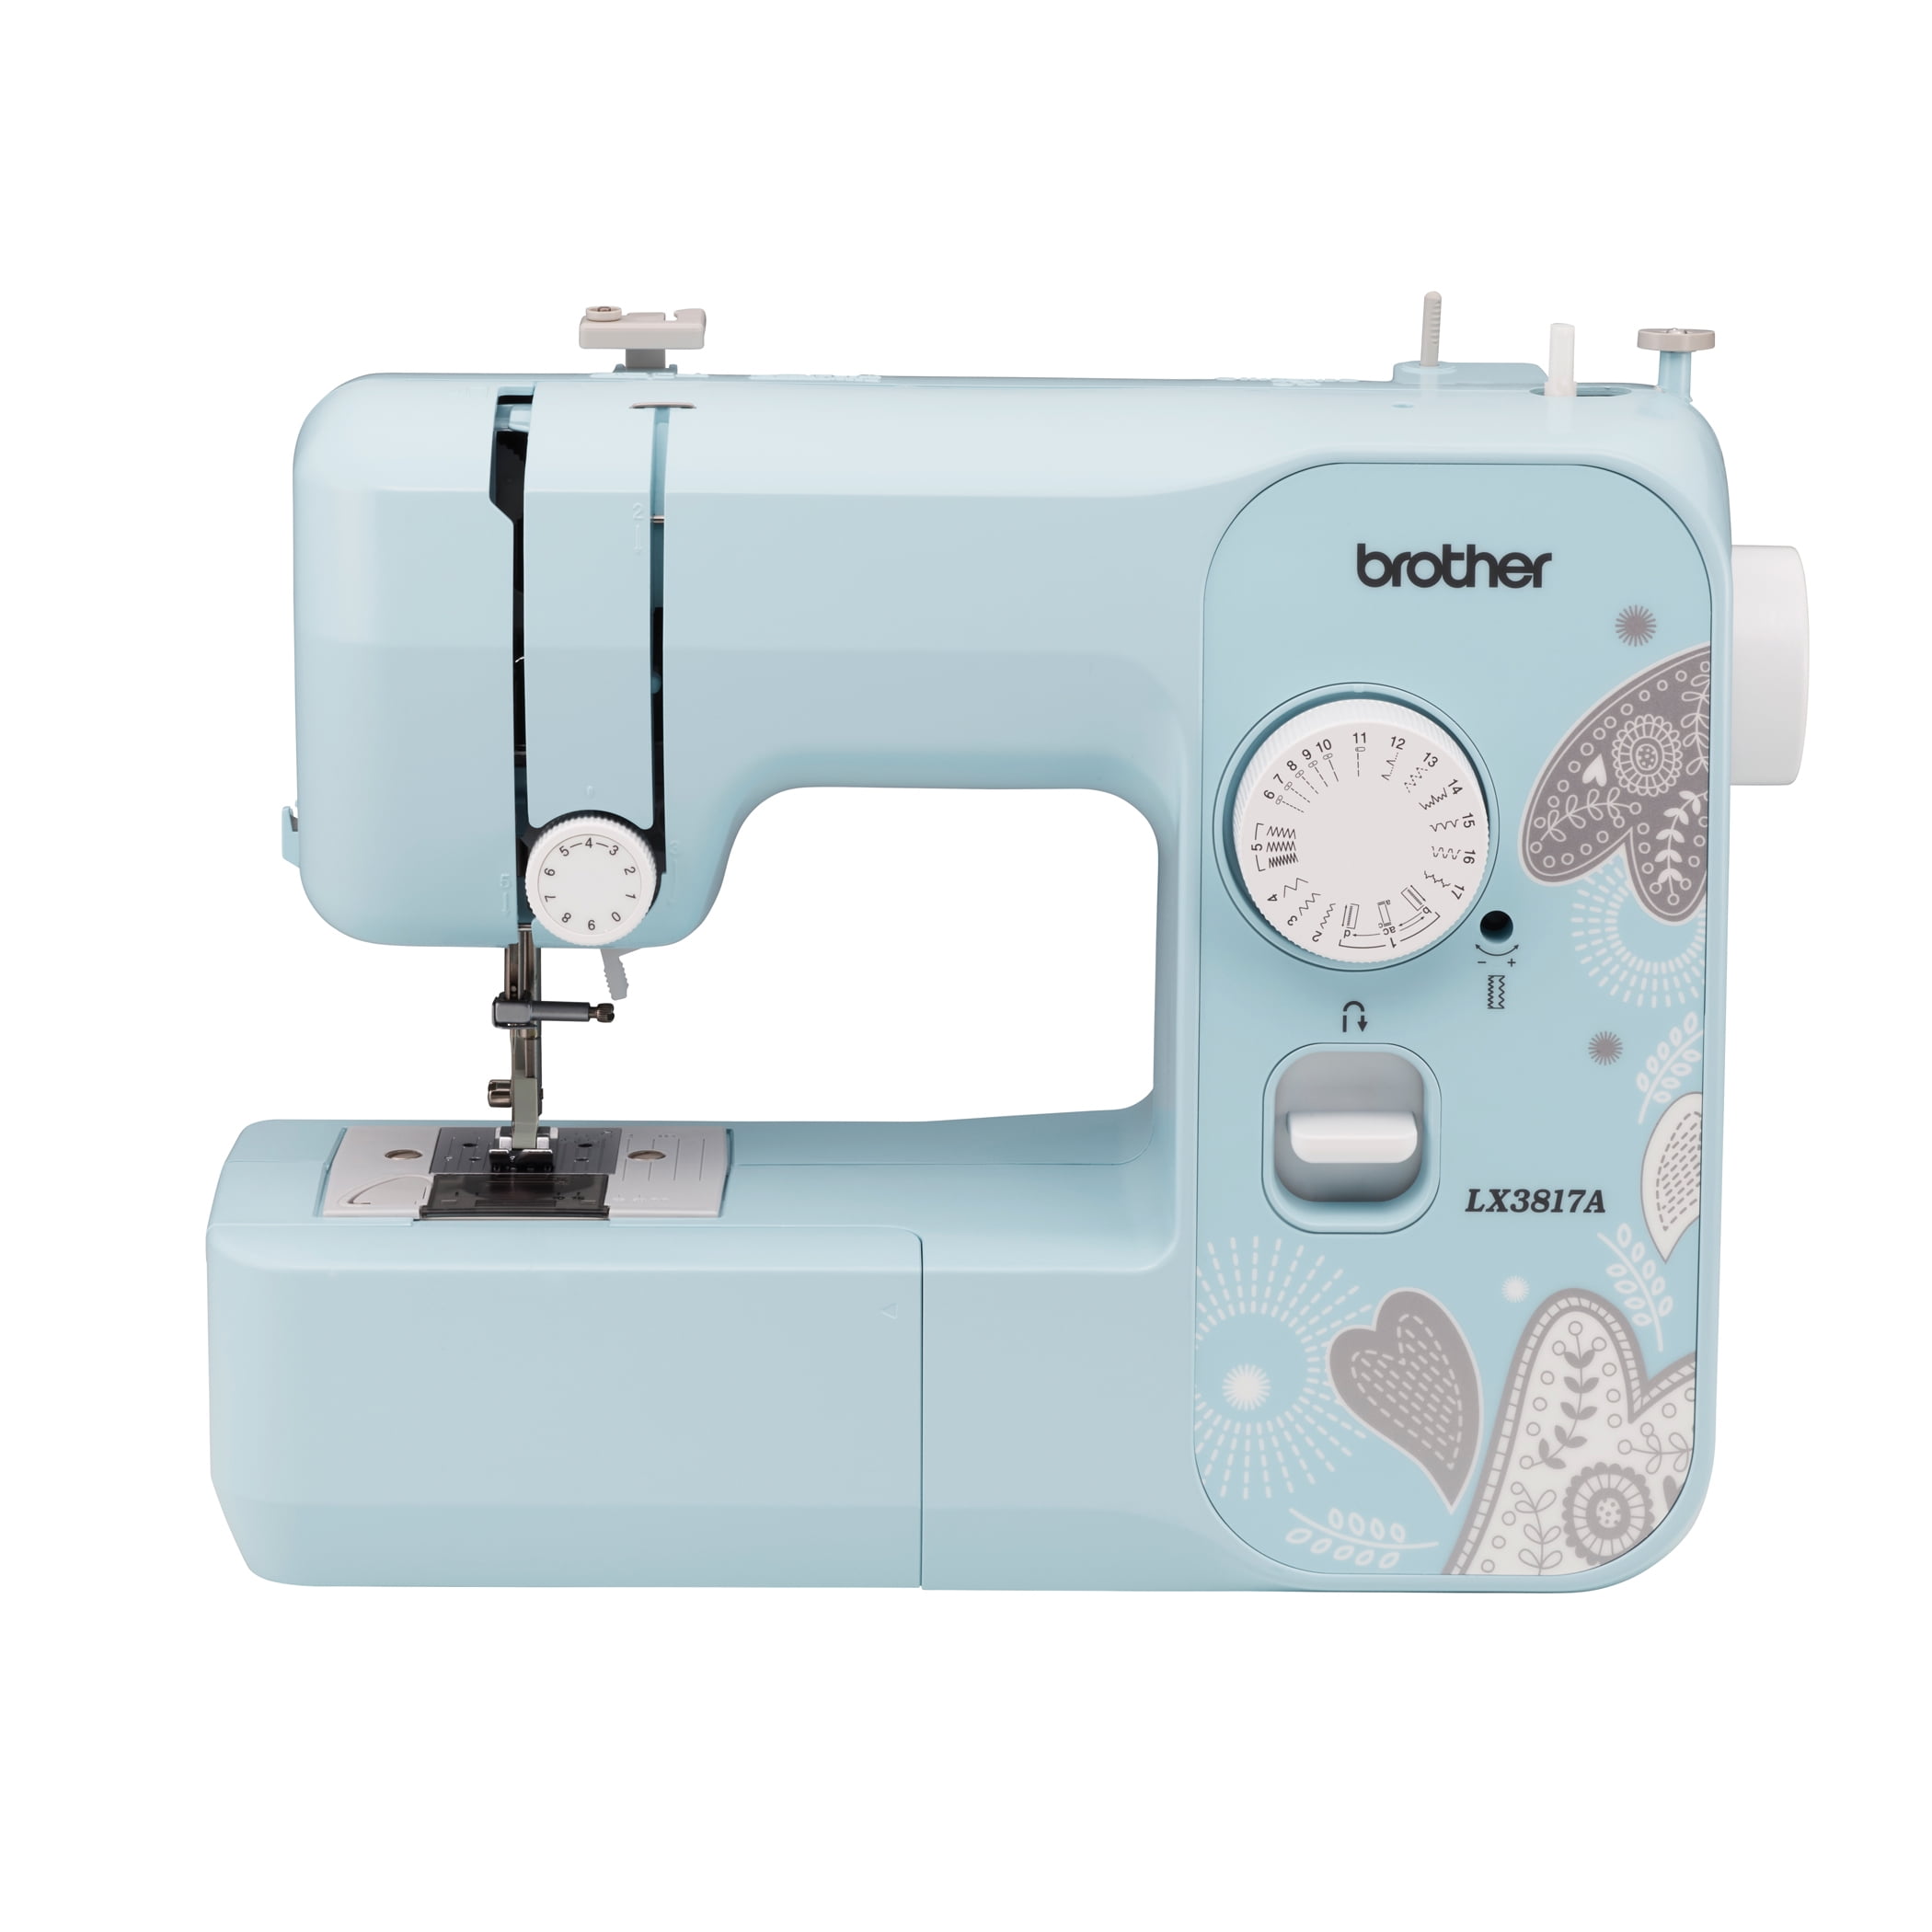 Best Brother Sewing Machines (Top 5 Review)